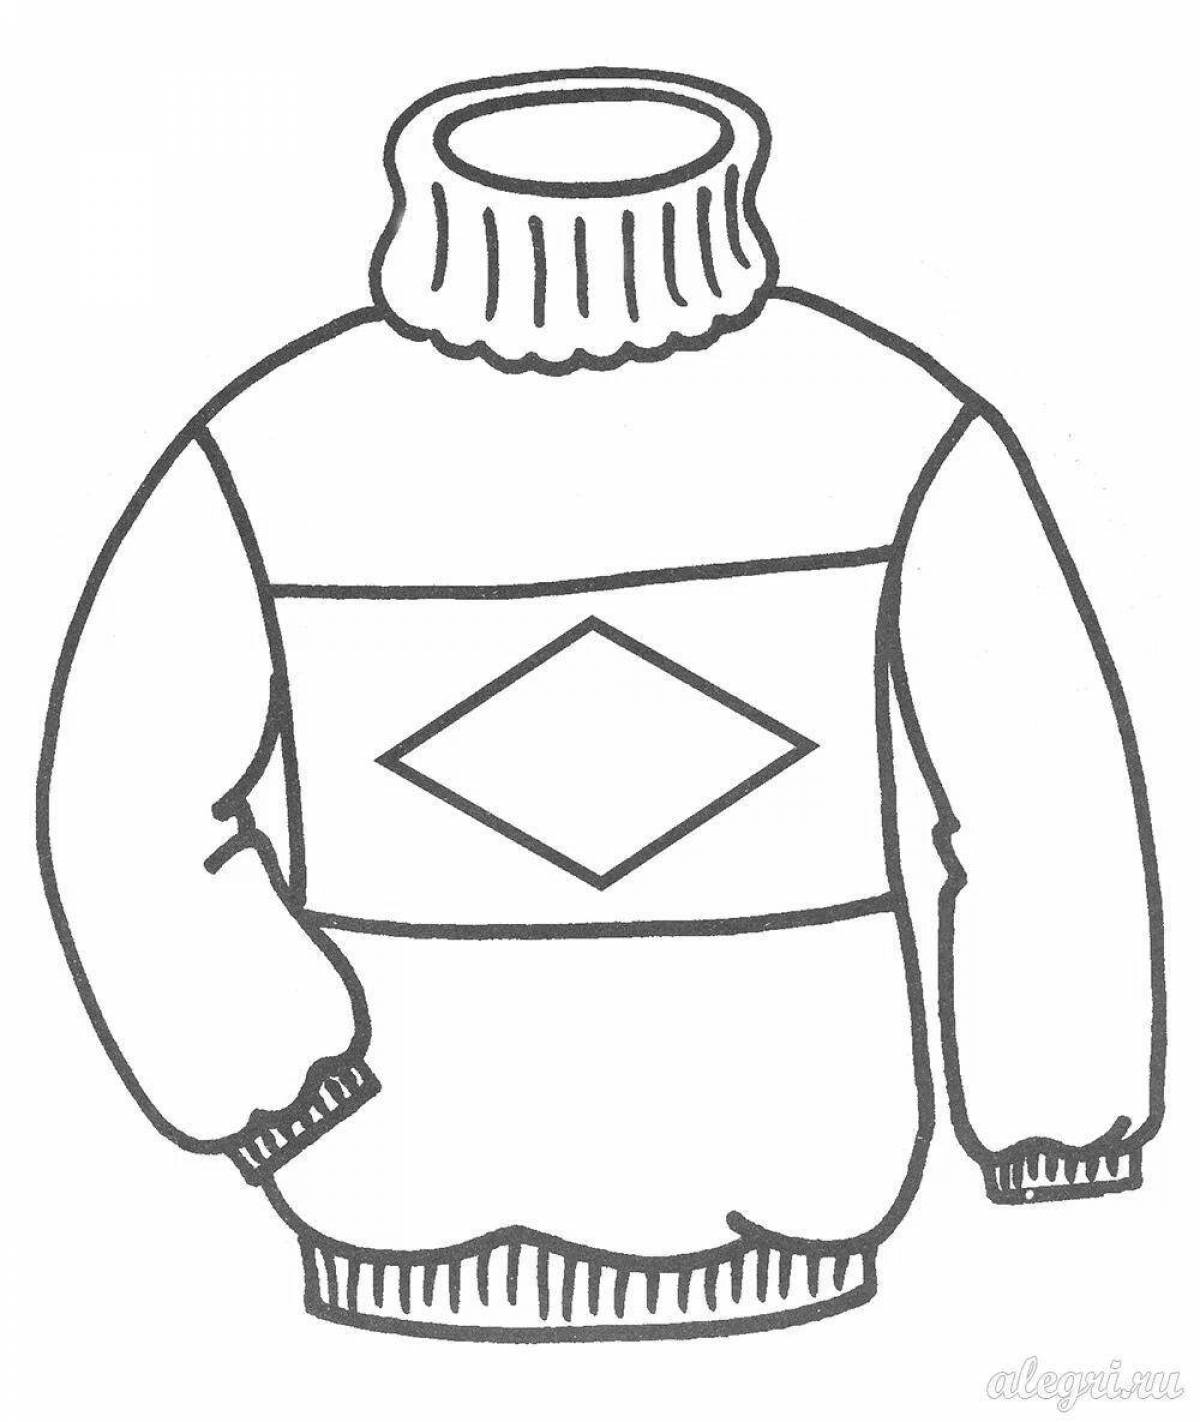 Awesome preschool jacket coloring page